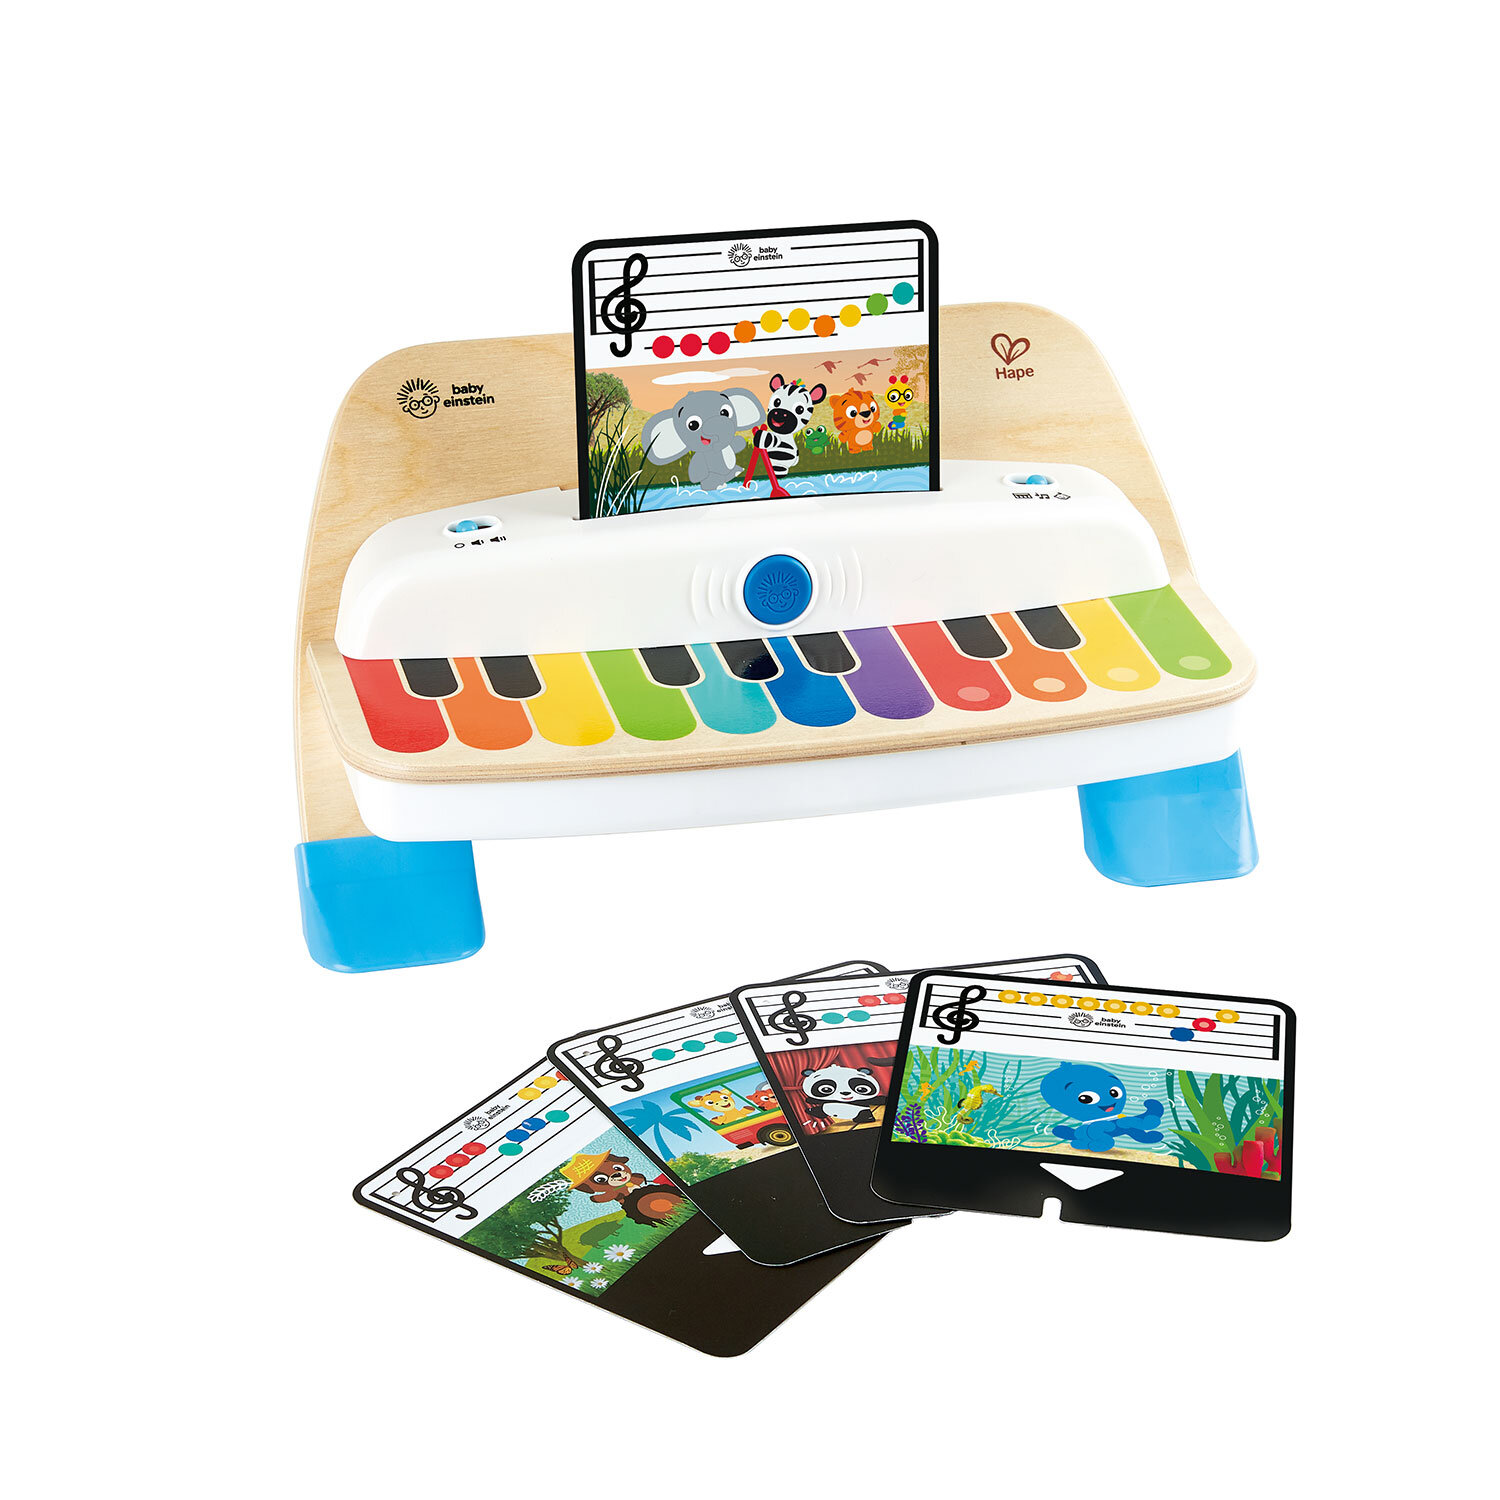 Music Set For Kids, Hape Multi Musical Block Set, With 5 Musical  Instruments. 18 months +